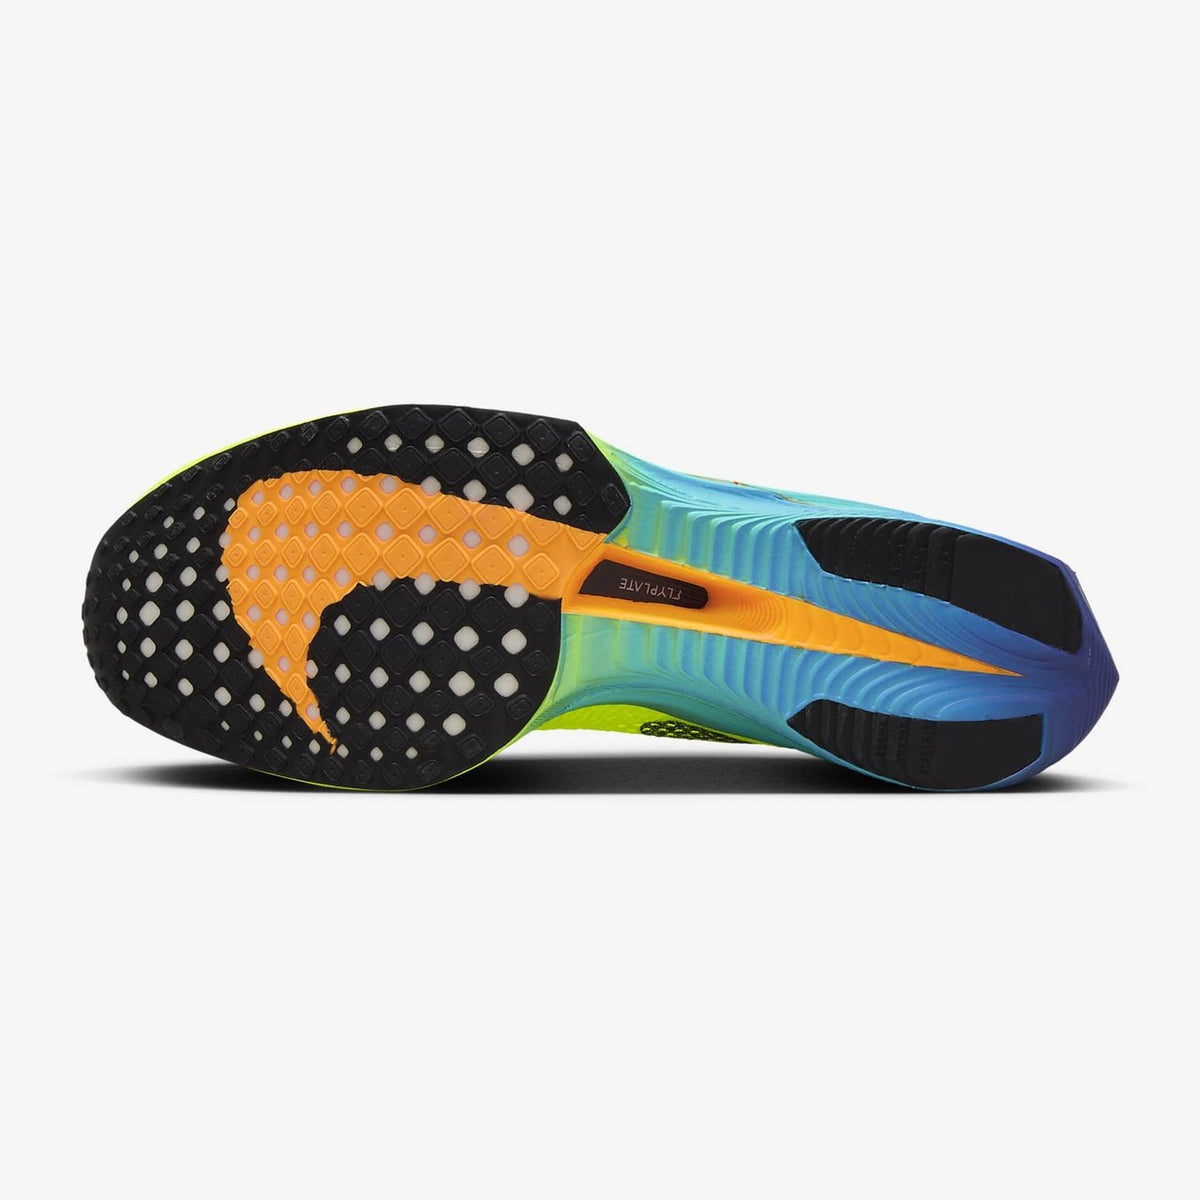 Nike ZoomX Vaporfly Next% 3 Mens - FOOTWEAR - Mens Carbon Plate